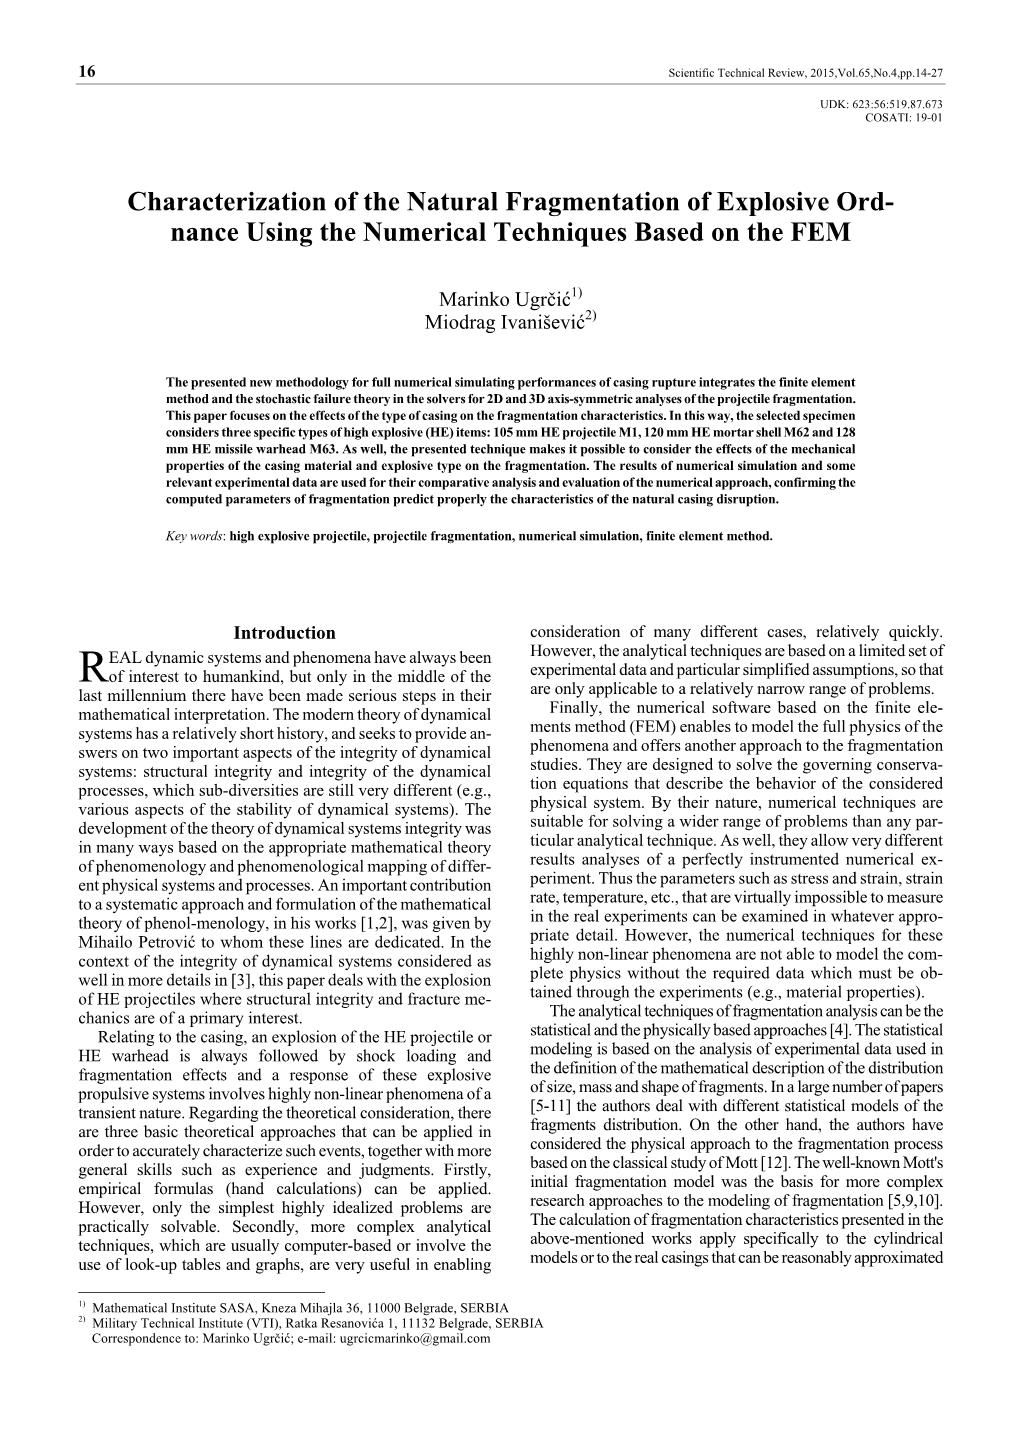 Characterization of the Natural Fragmentation of Explosive Ord- Nance Using the Numerical Techniques Based on the FEM